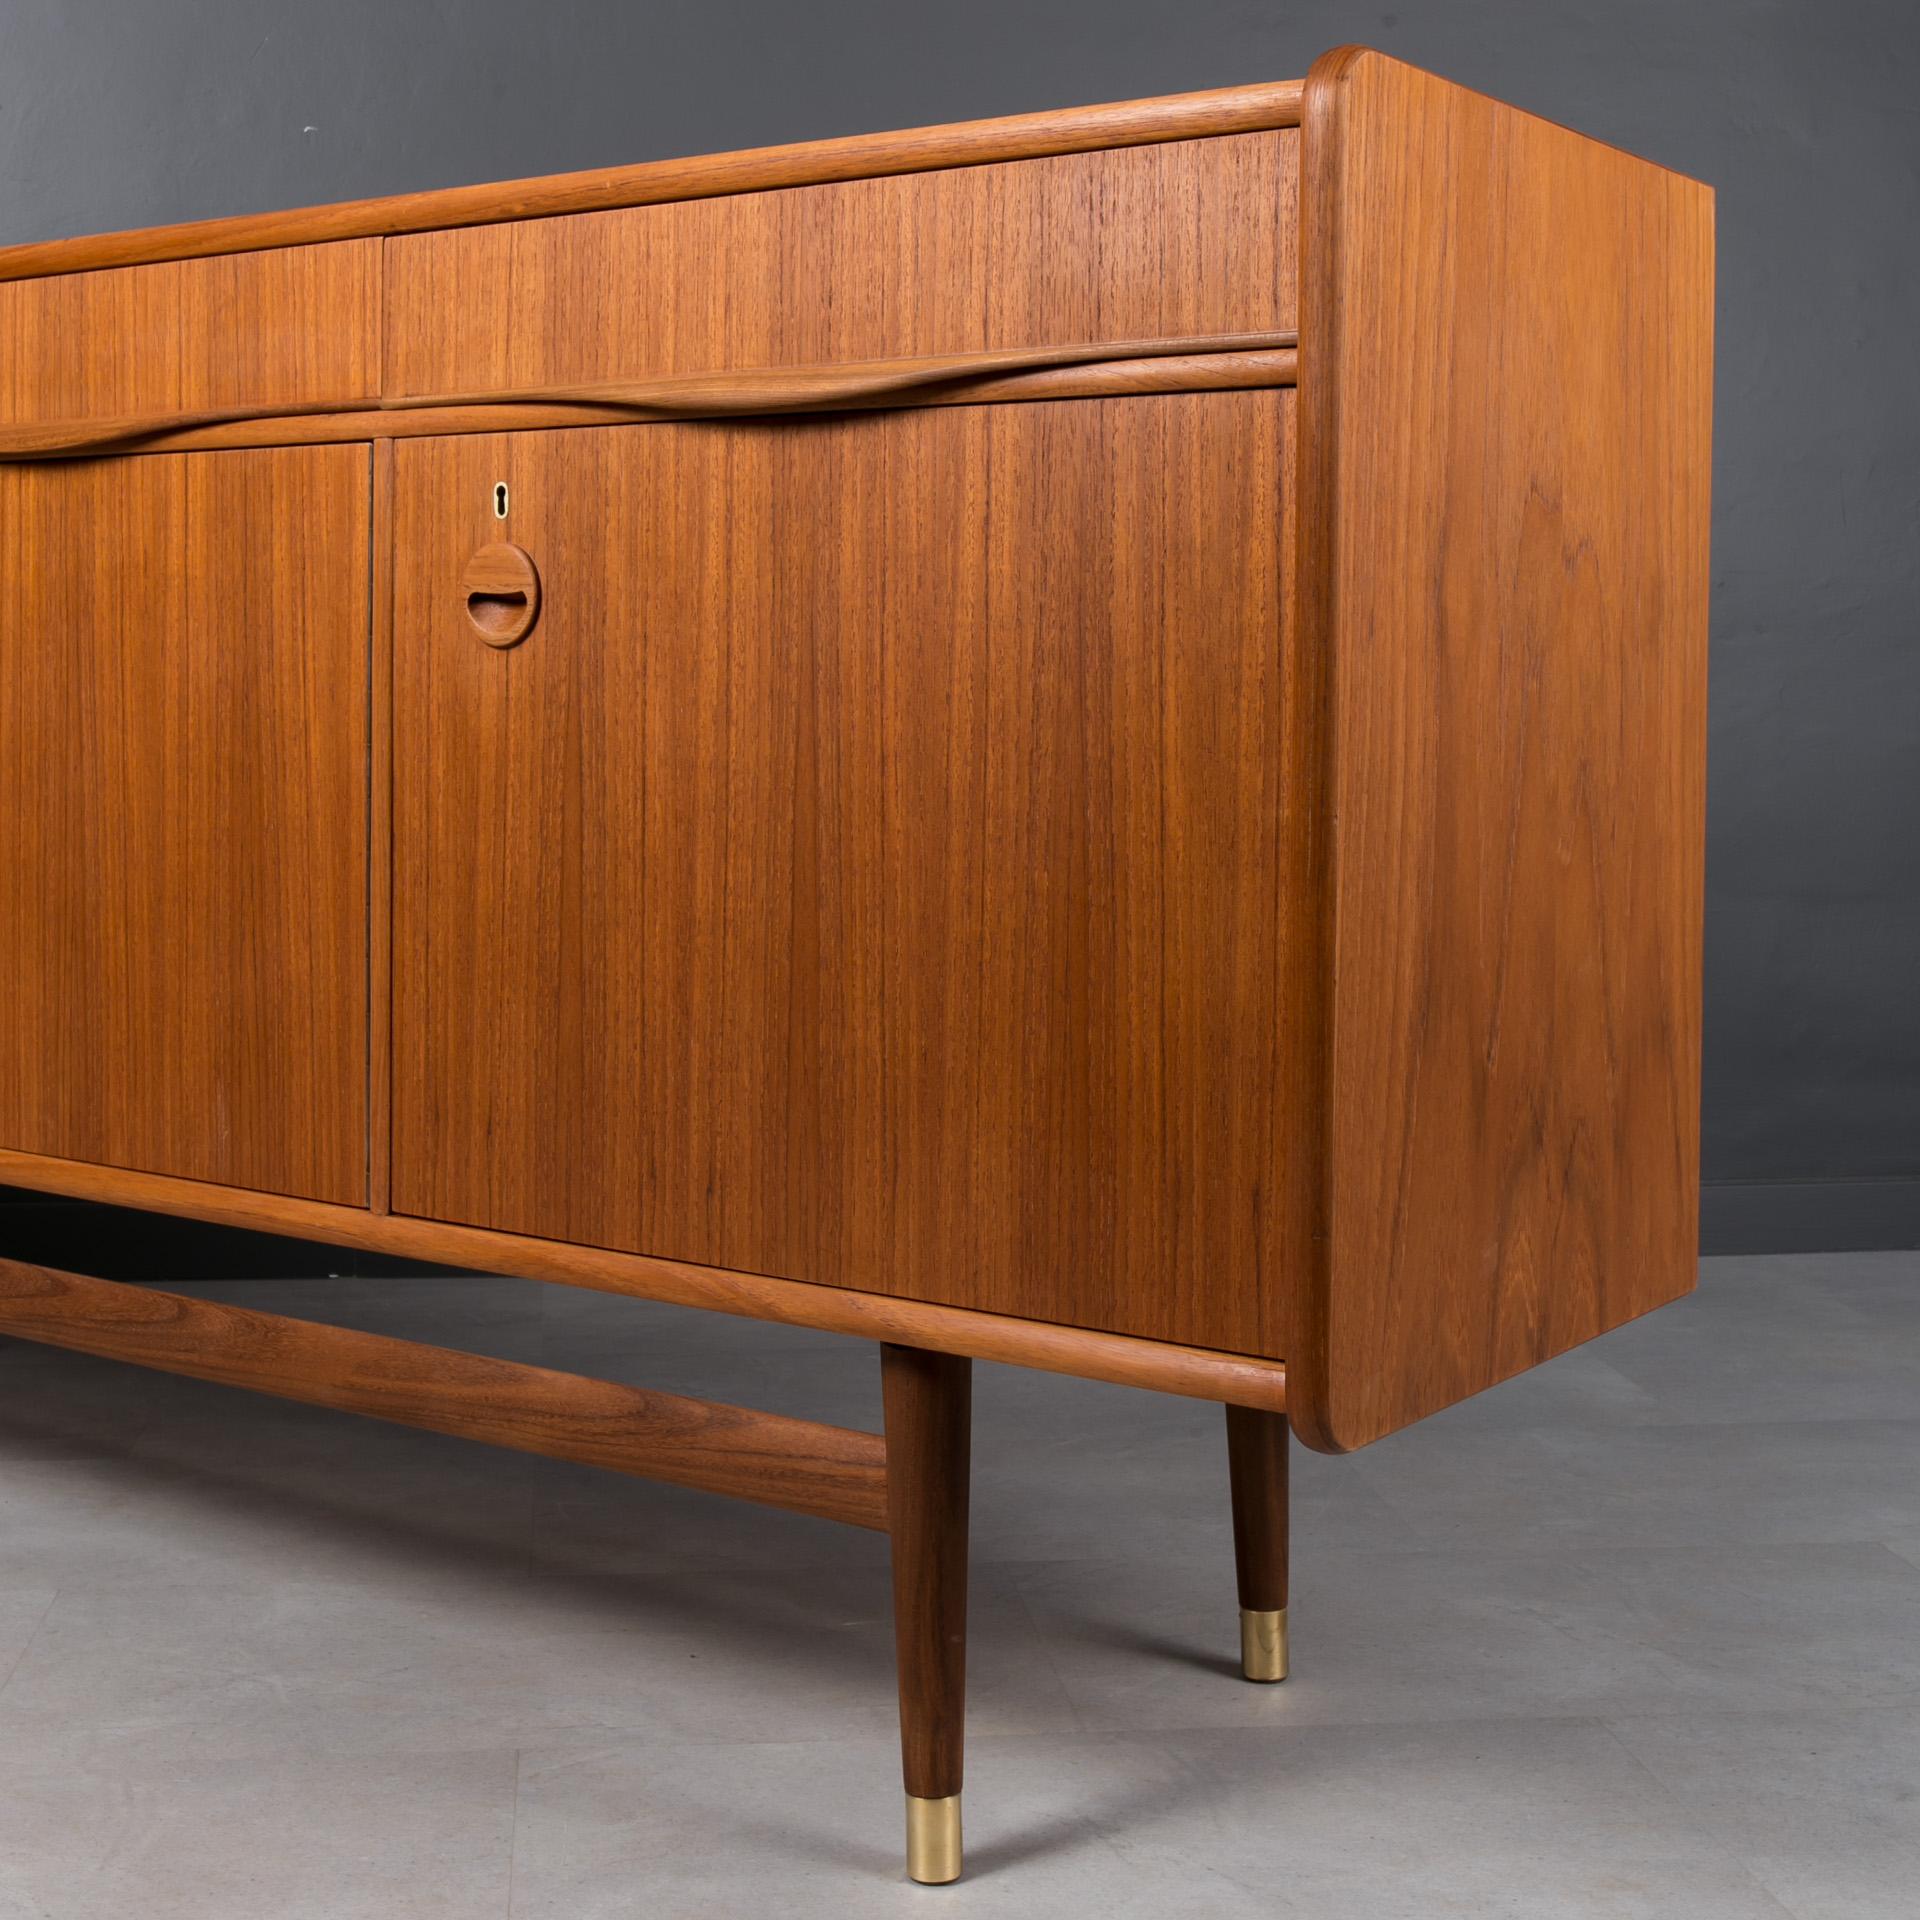 Mid-20th Century Midcentury Sideboard, Teak Wood and Brass Details, Norway, 1960s